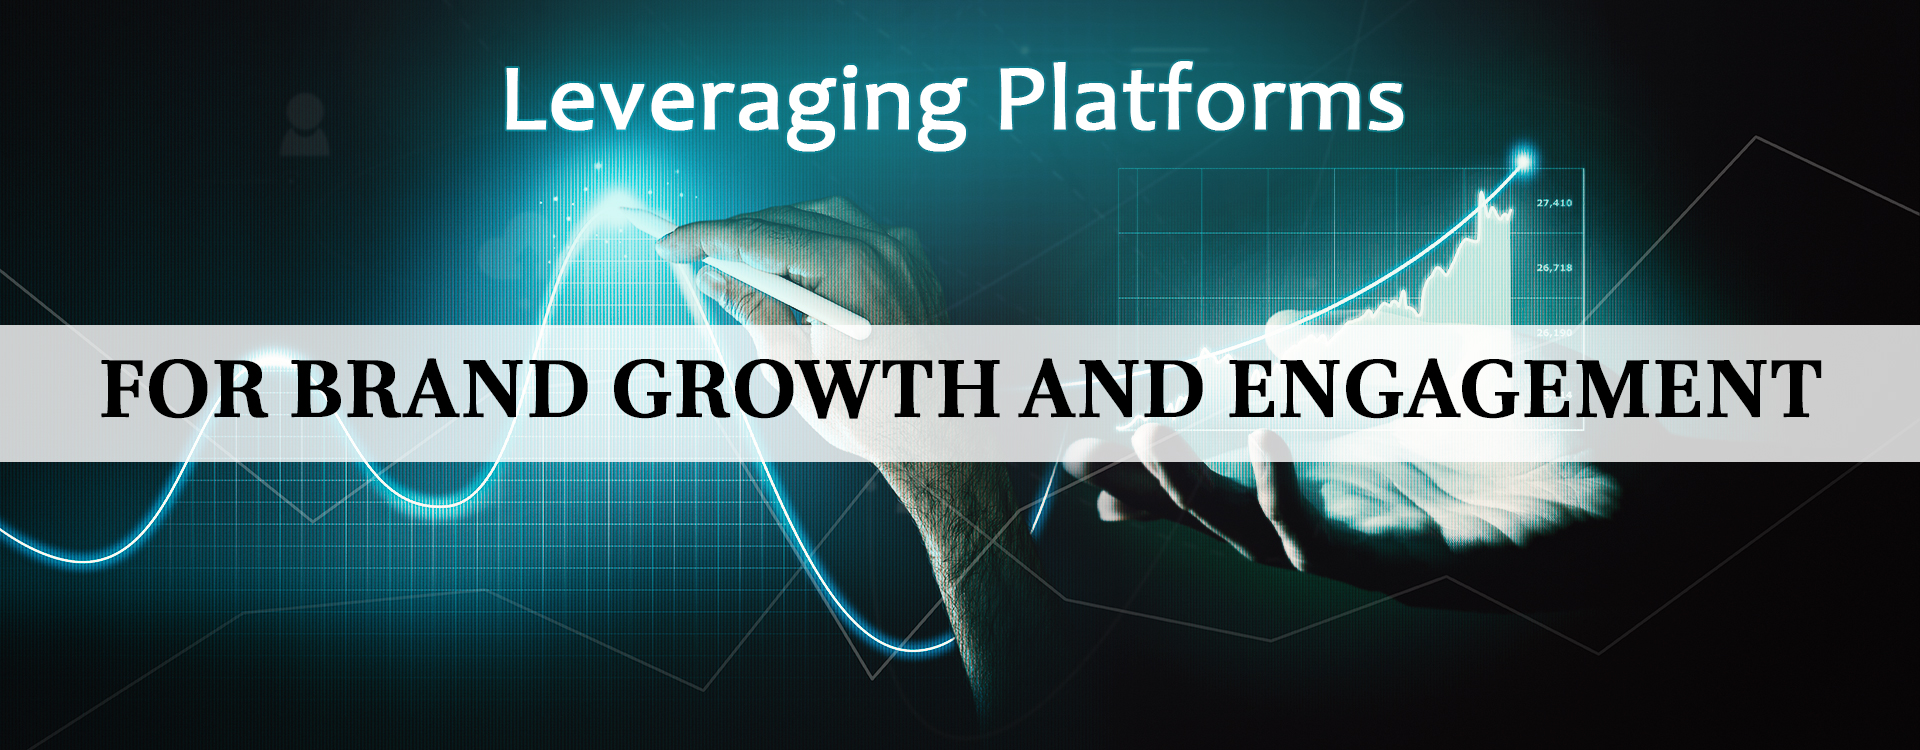 Leveraging Platforms for Brand Growth and Engagement